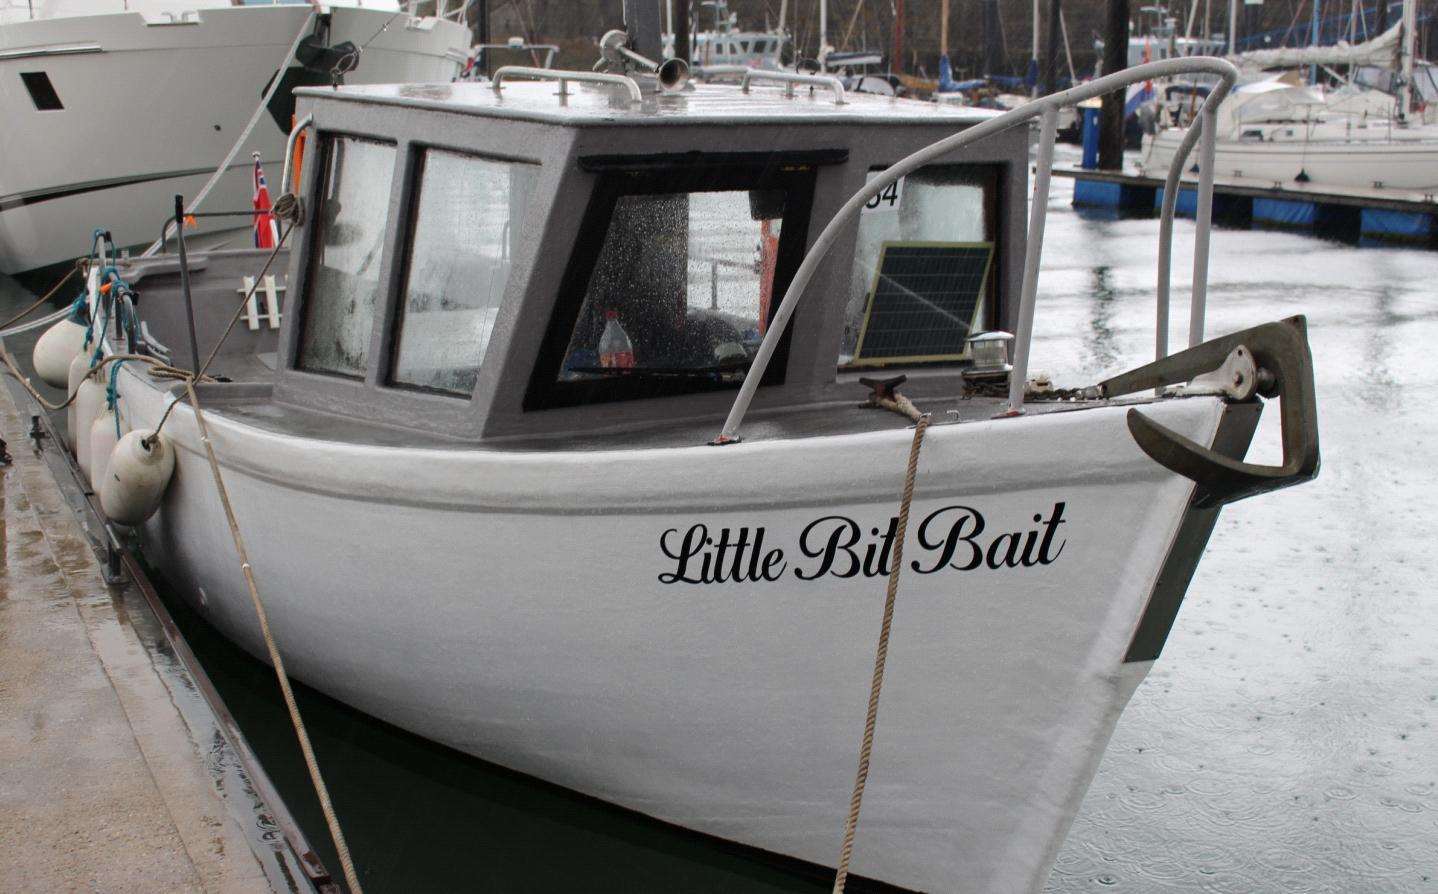 The boat, “A Little Bit of Bait” was brought into Ramsgate harbour where Border Force officers were waiting (6901773)